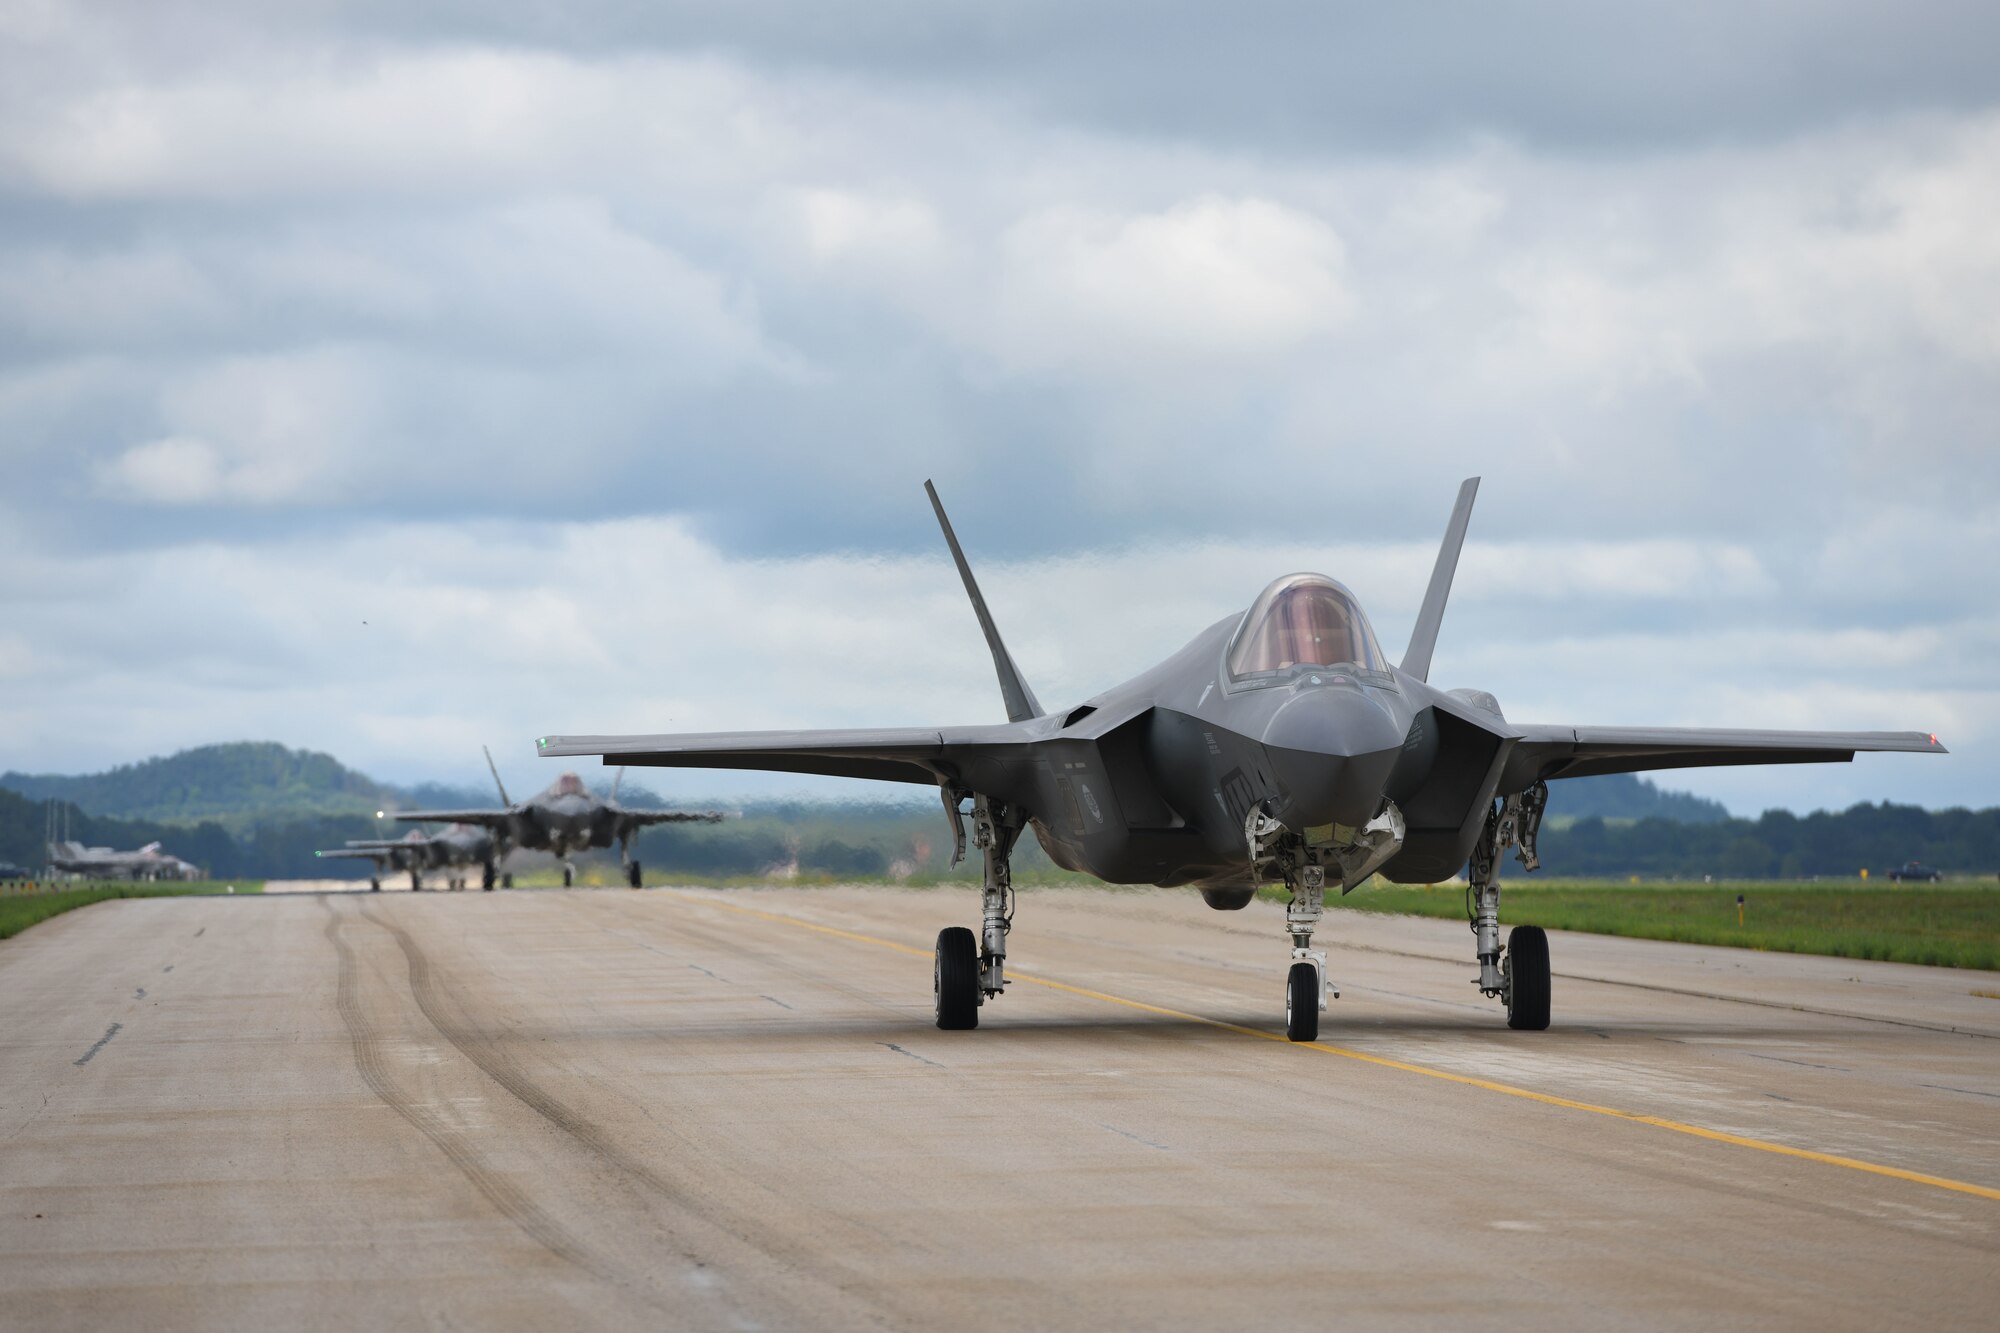 Several 33rd Fighter Wing F-35A Lightning IIs taxi down the Volk Field, Wisconsin. runway, during the Northern Lightning exercise, Aug. 13, 2019. Northern Lightning is a joint total force exercise that provides tactical-level, high-end training for current and future weapons platforms. (U.S. Air Force photo by Airman 1st Class Heather Leveille)